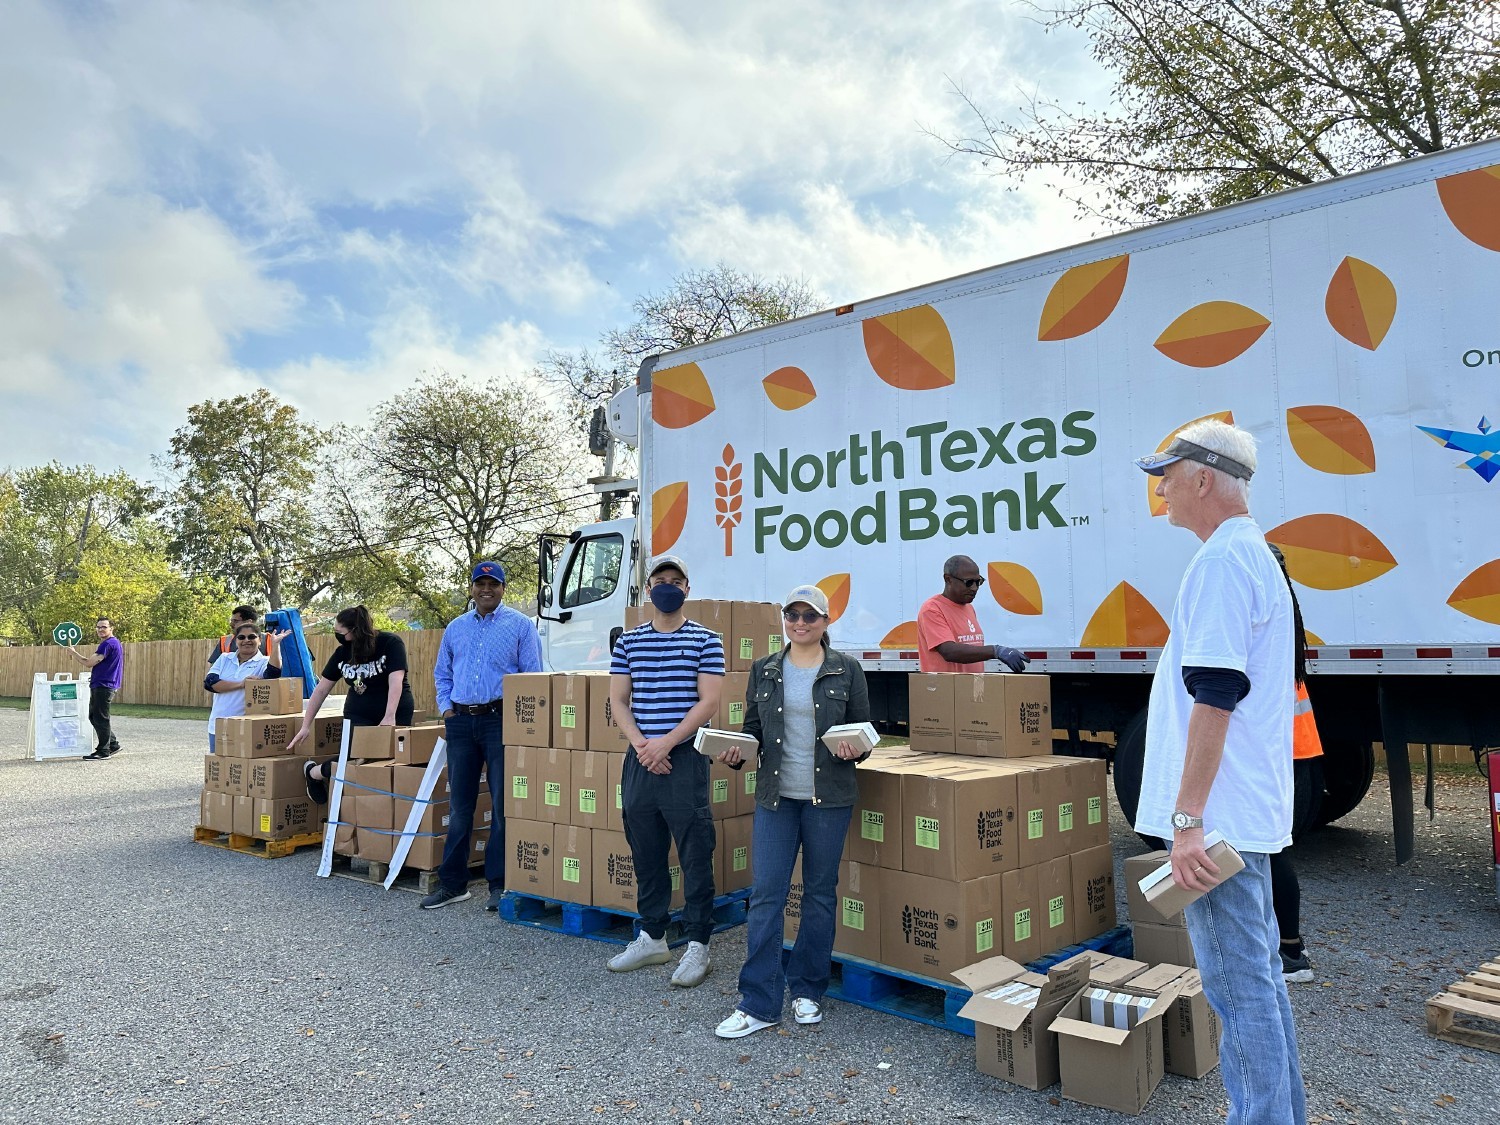 We had a memorable time volunteering at the #NorthTexasFoodBank as part of our #CorporateSocialResponsibility(#CSR).